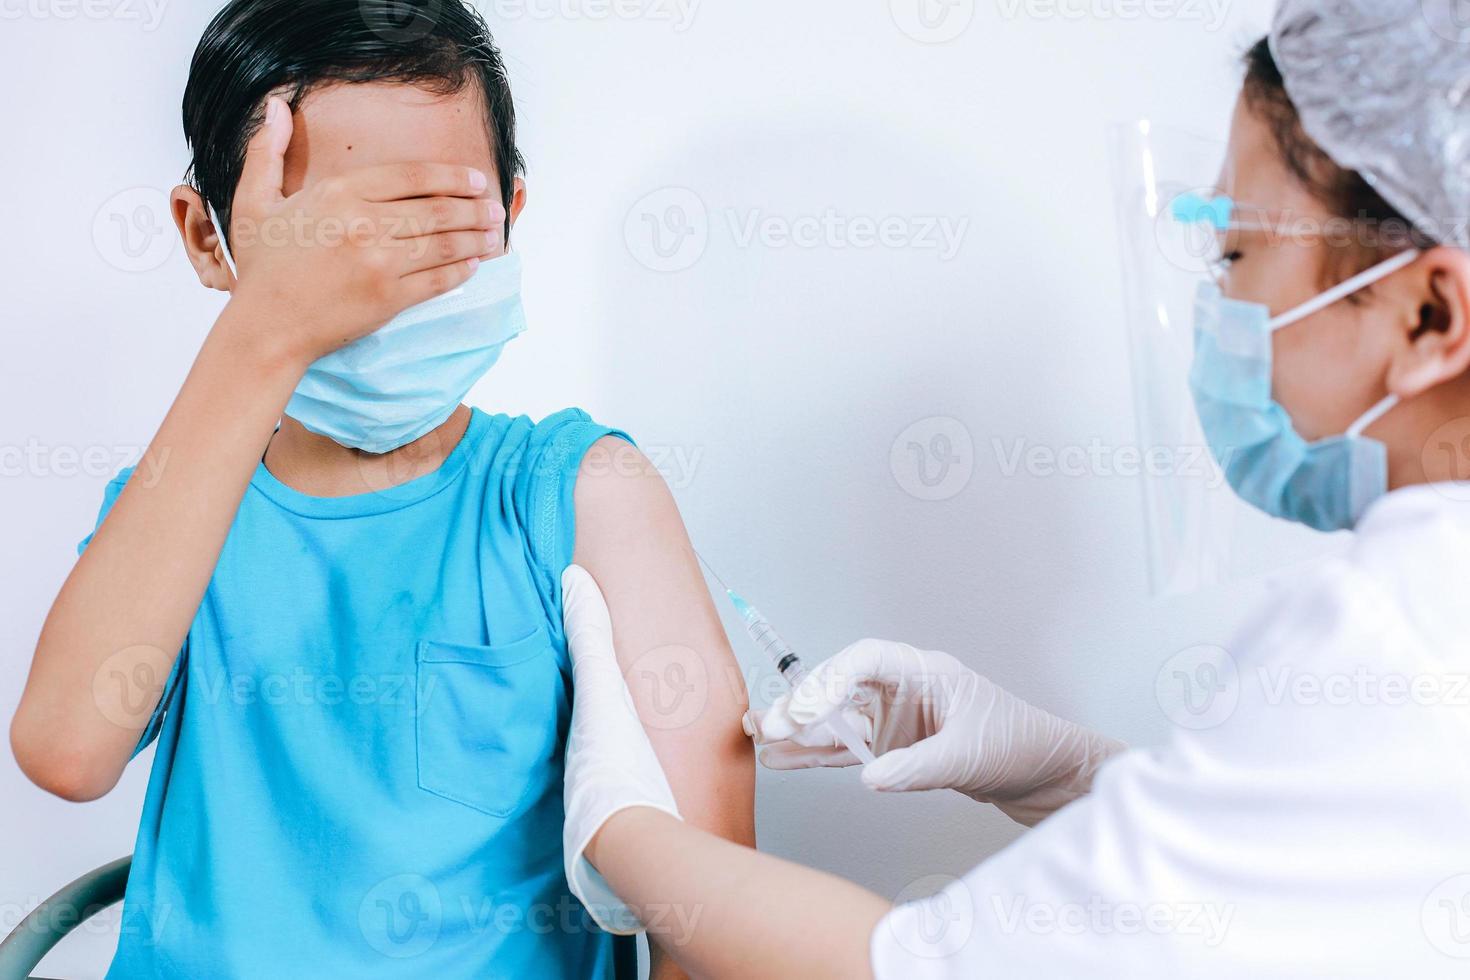 Scary boy expression  when being in vaccine injection by the doctor, injections phobia. Medicine, vaccination, immunization and health care concept photo